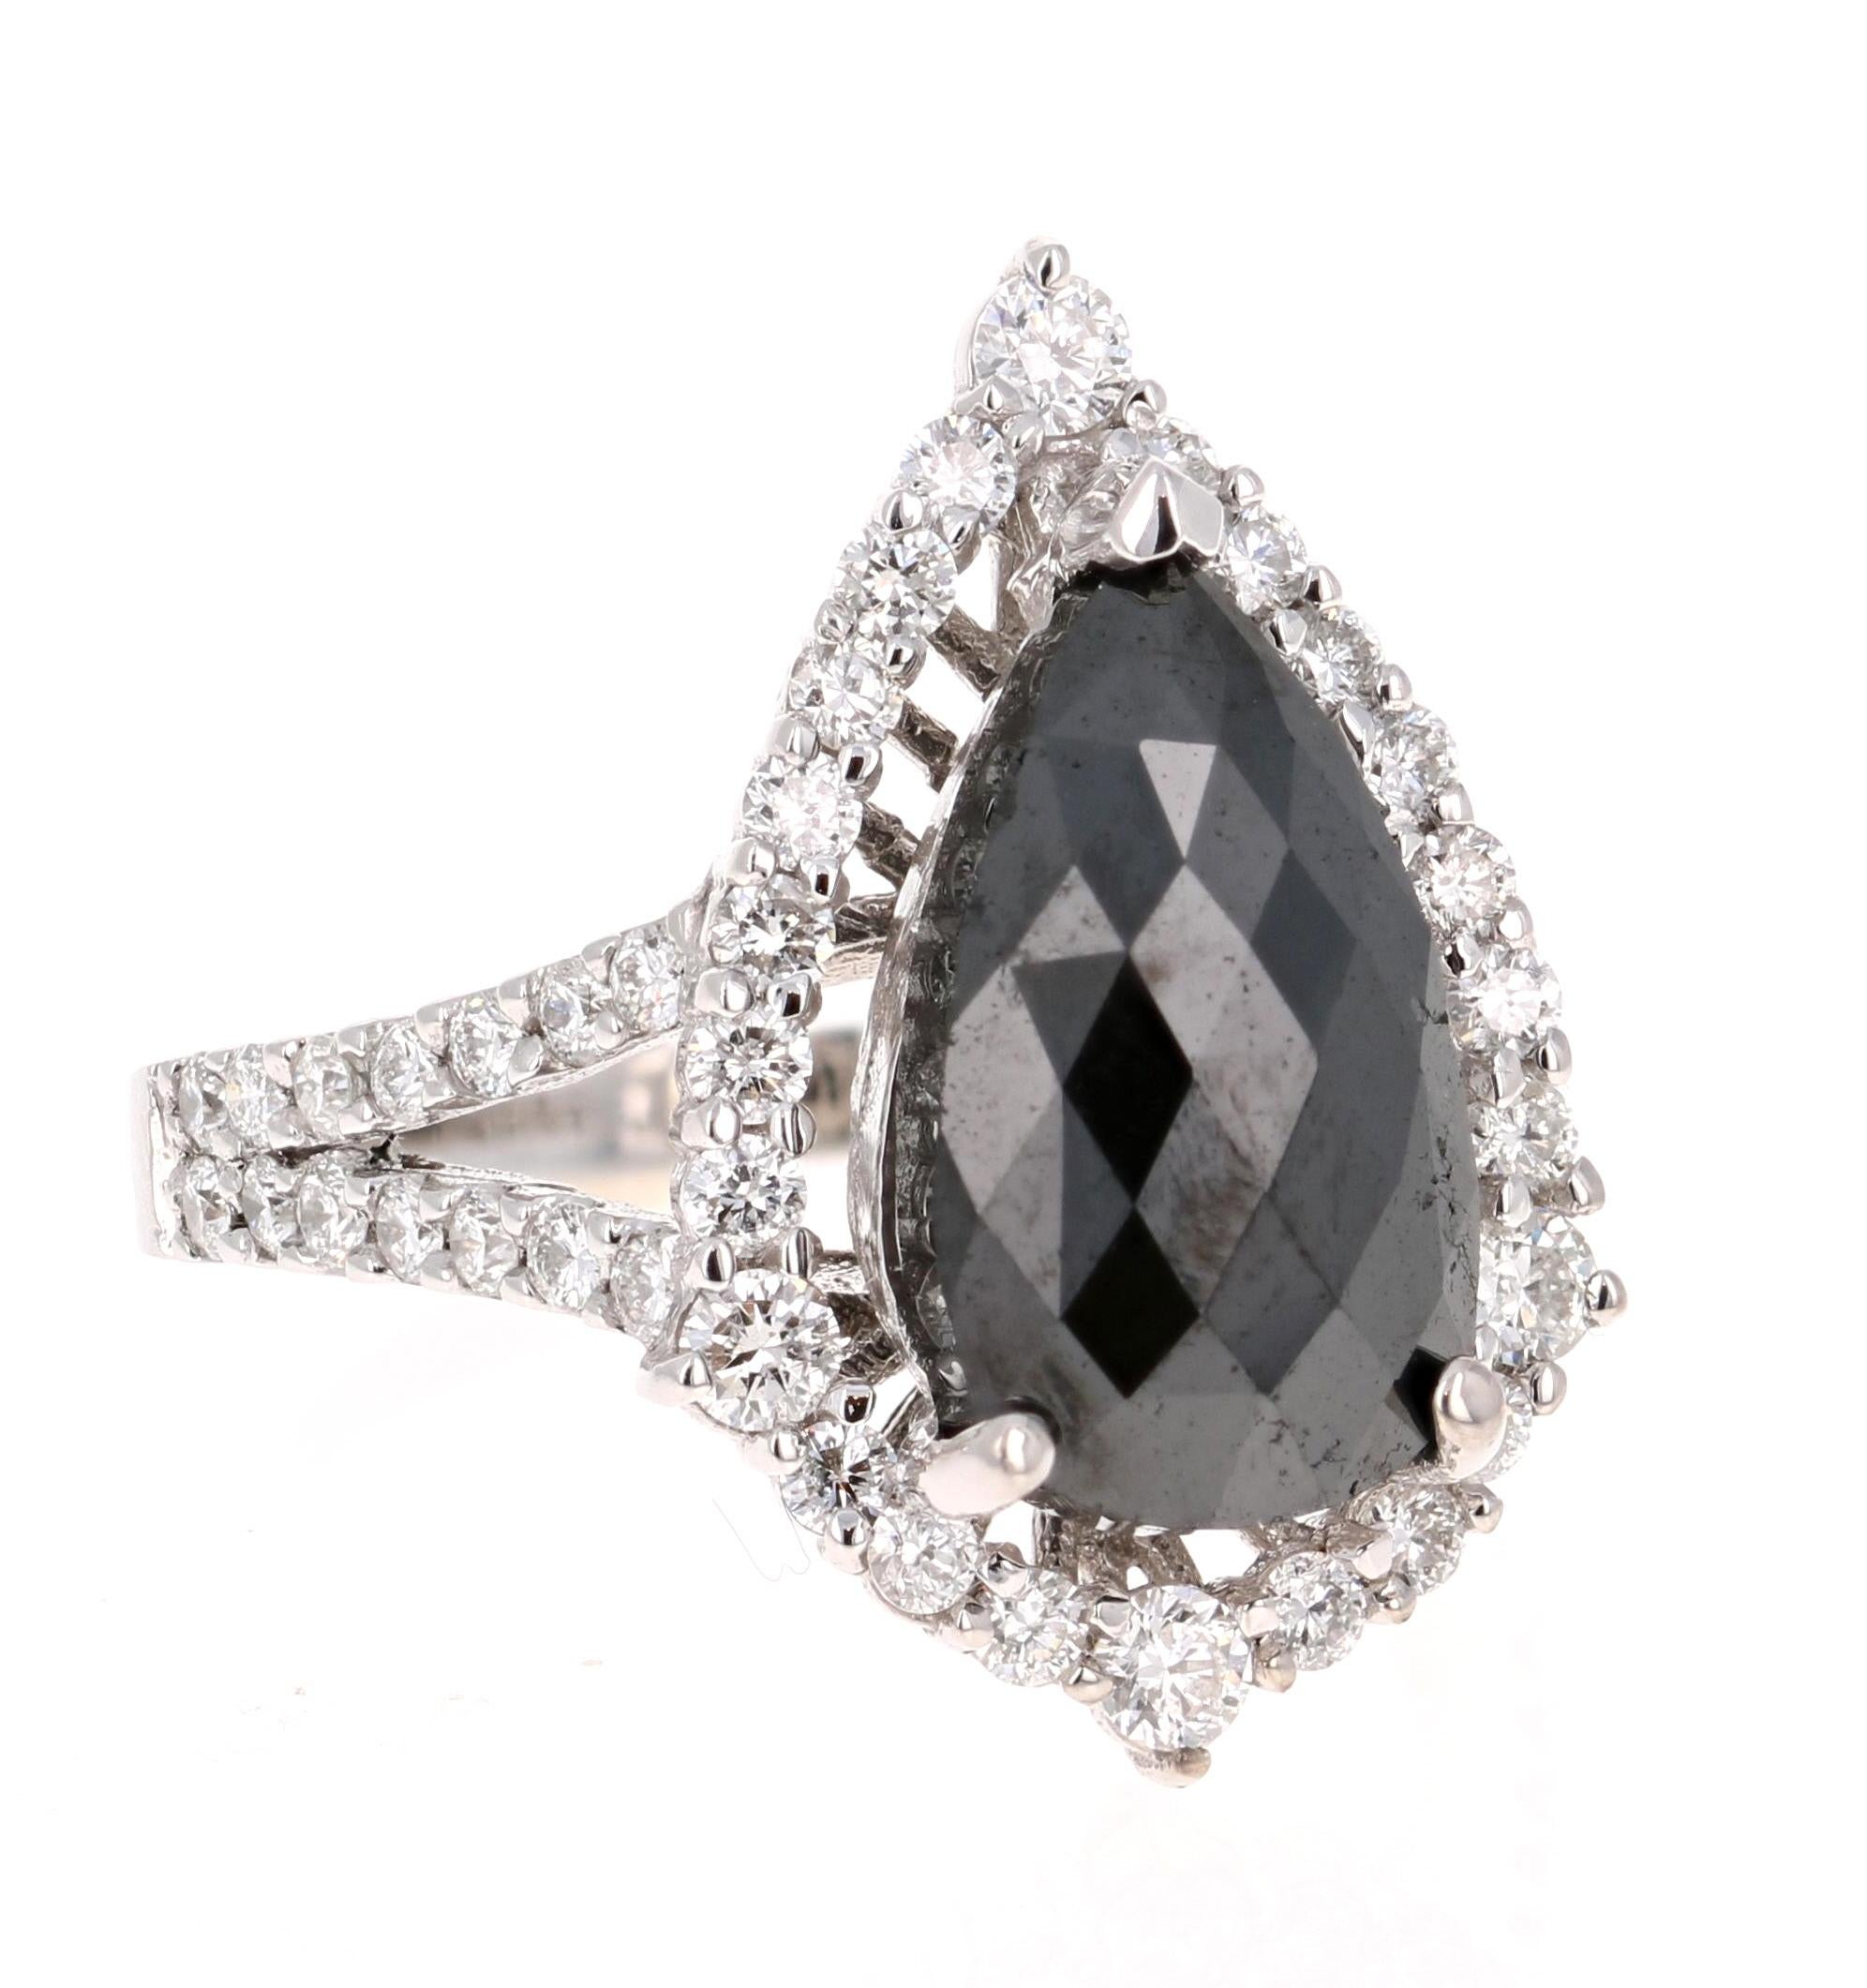 A stunner that can transcend into a unique engagement ring!! 

The Black Diamond is a Pear Cut and weighs 3.95 carats. The Black Diamond is a natural diamond that has been color-treated to enhance the black color. The Black Diamond is surrounded by